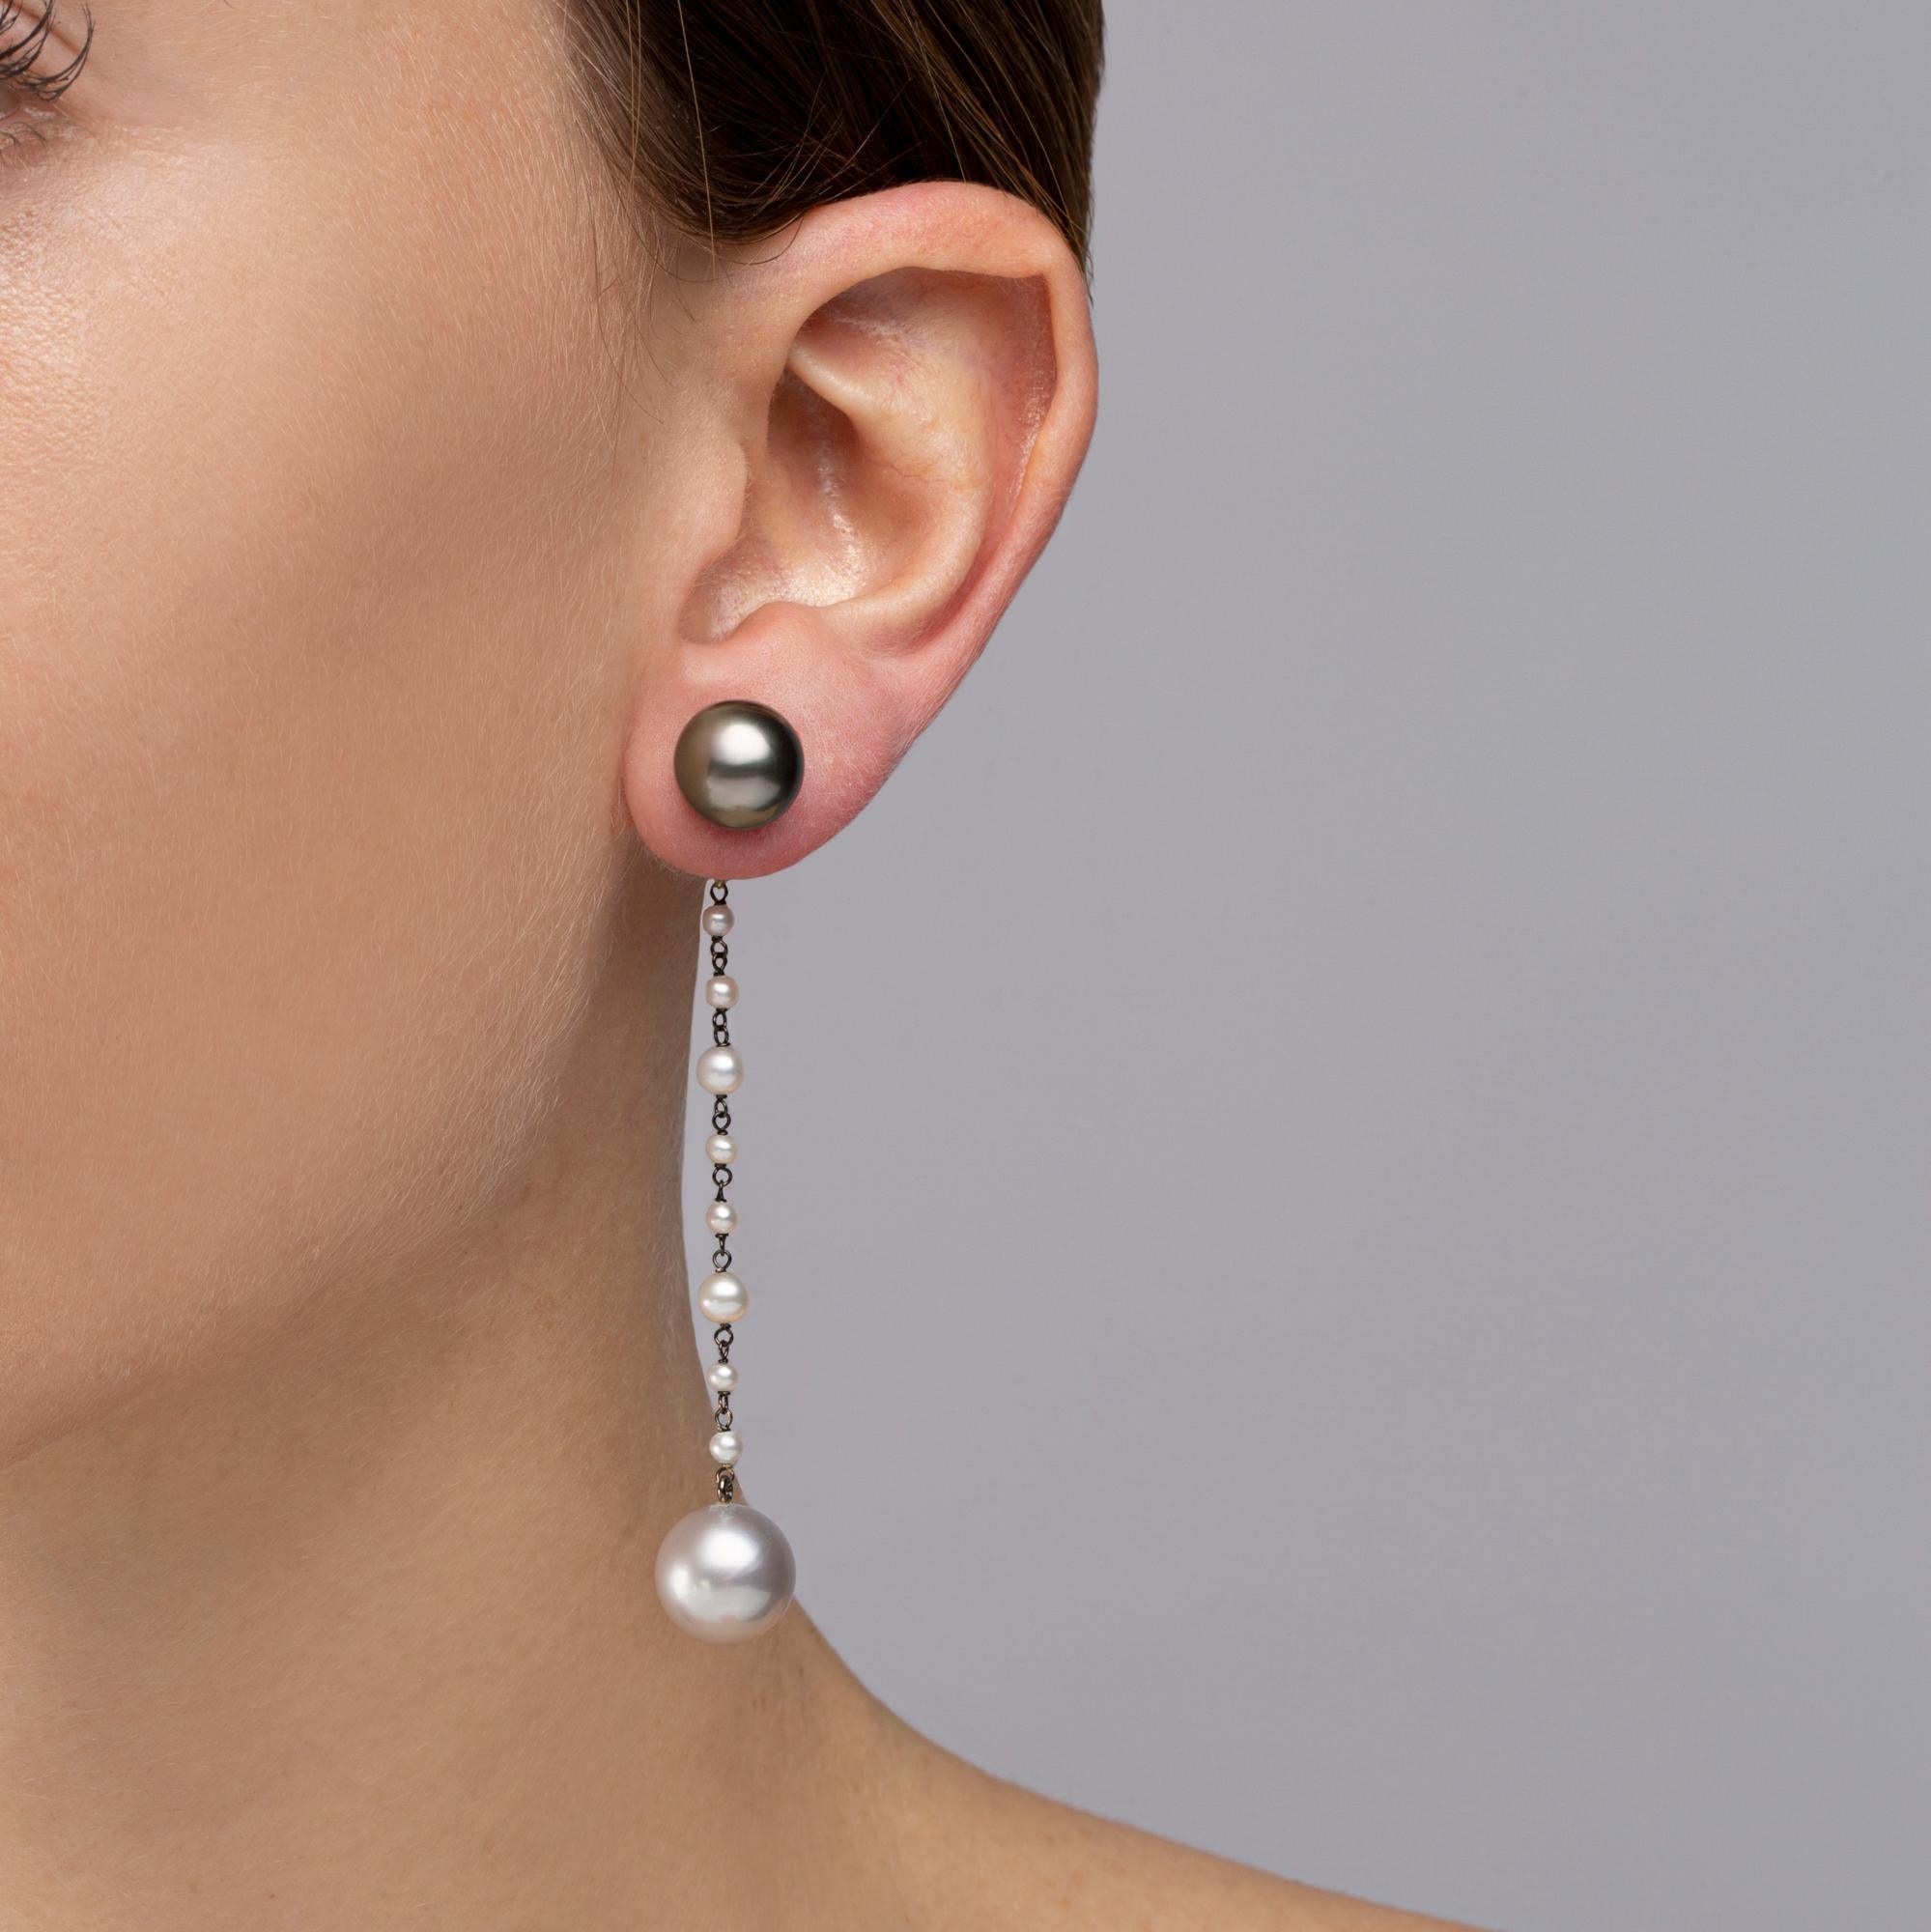 Alex Jona design collection, hand crafted in Italy, 18 karat white gold dangle pearl earrings, showcasing two natural grey Tahiti pearls, two south sea white pearls and smaller white natural pearls.  The grey pearls may be worn separately, as stud